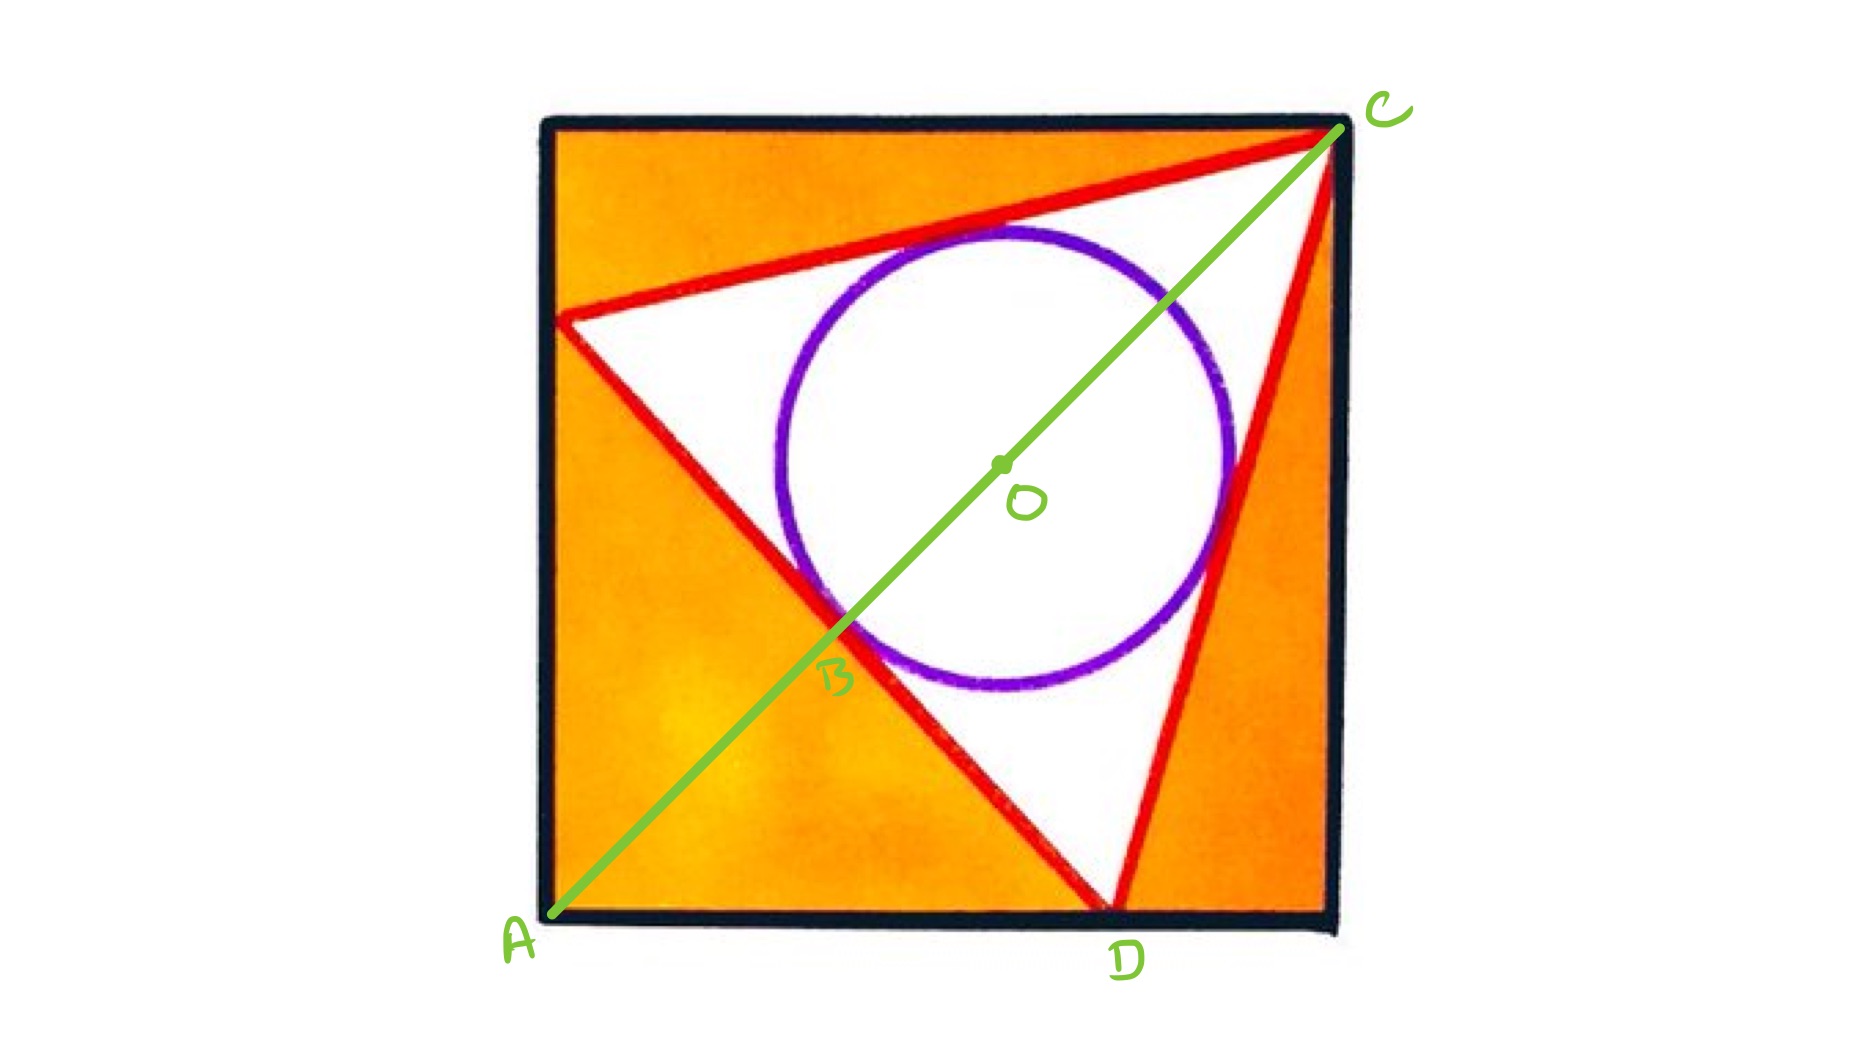 Circle in triangle in square labelled